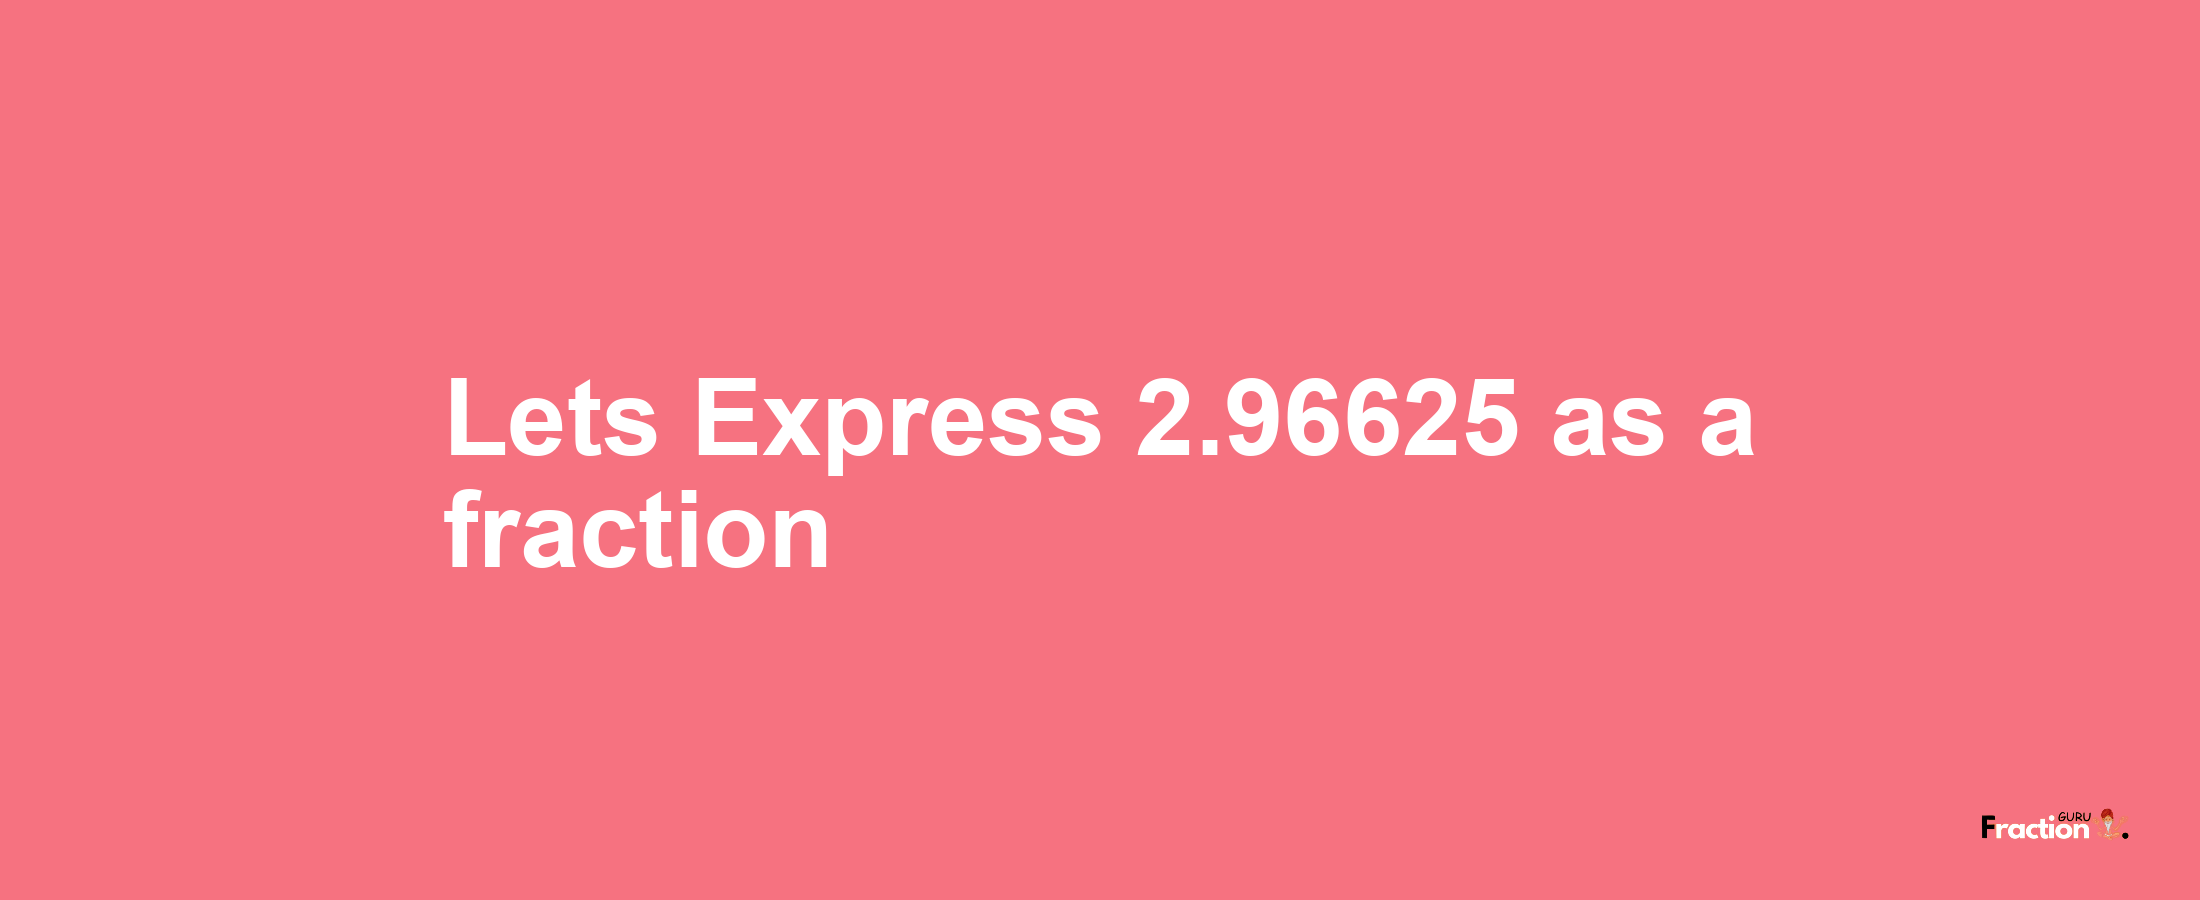 Lets Express 2.96625 as afraction